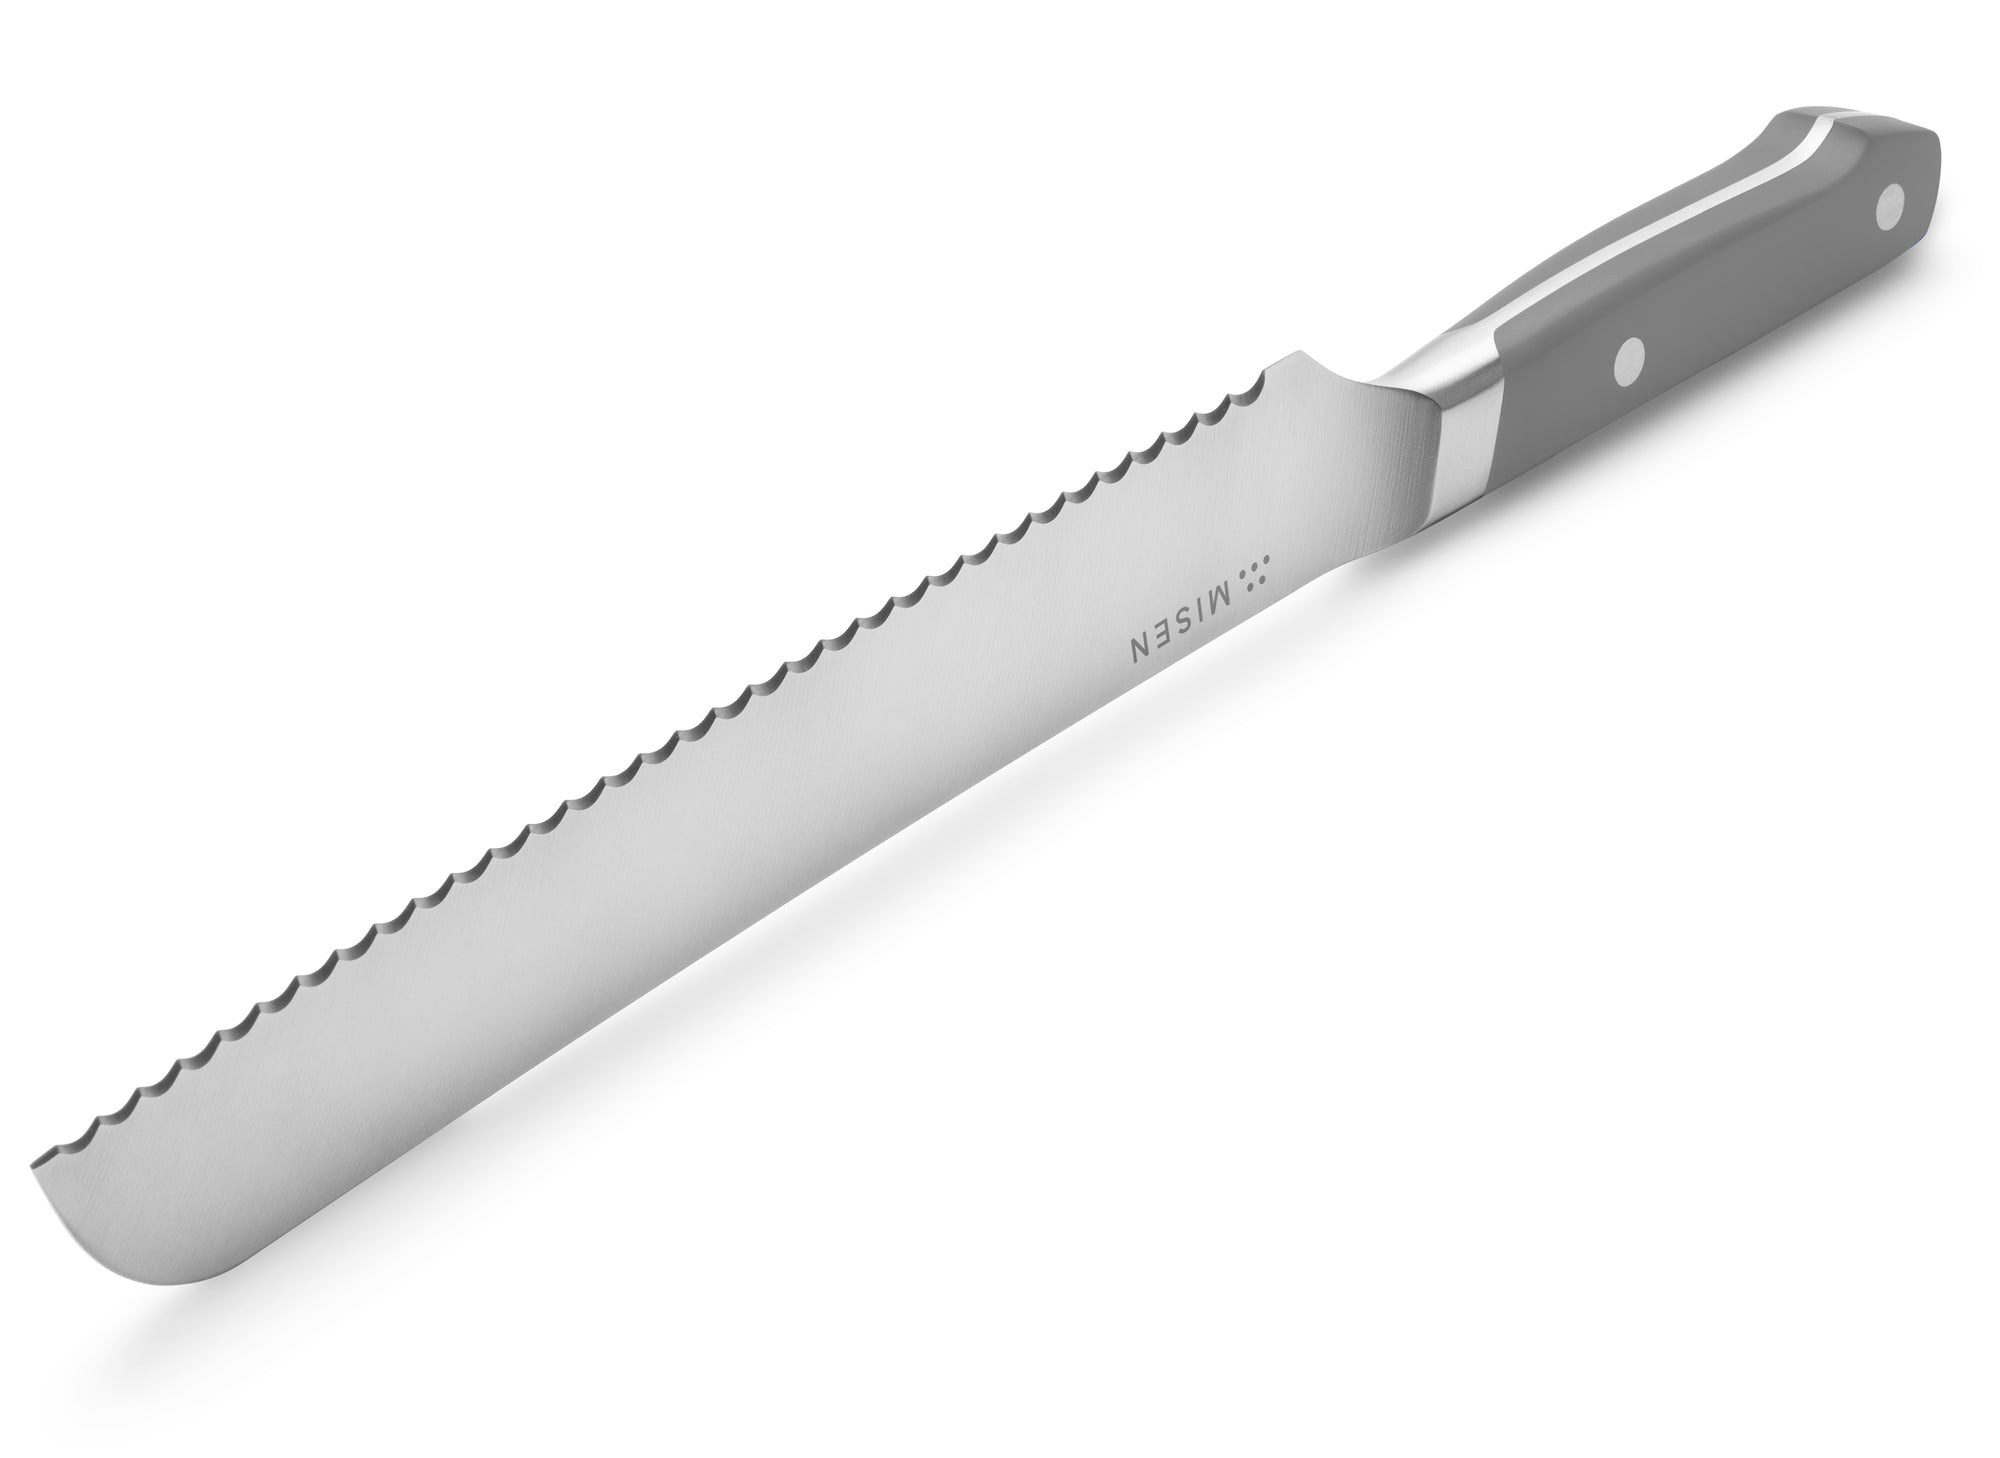 The edge of the gray Misen Serrated Knife has 32 pointed tips.